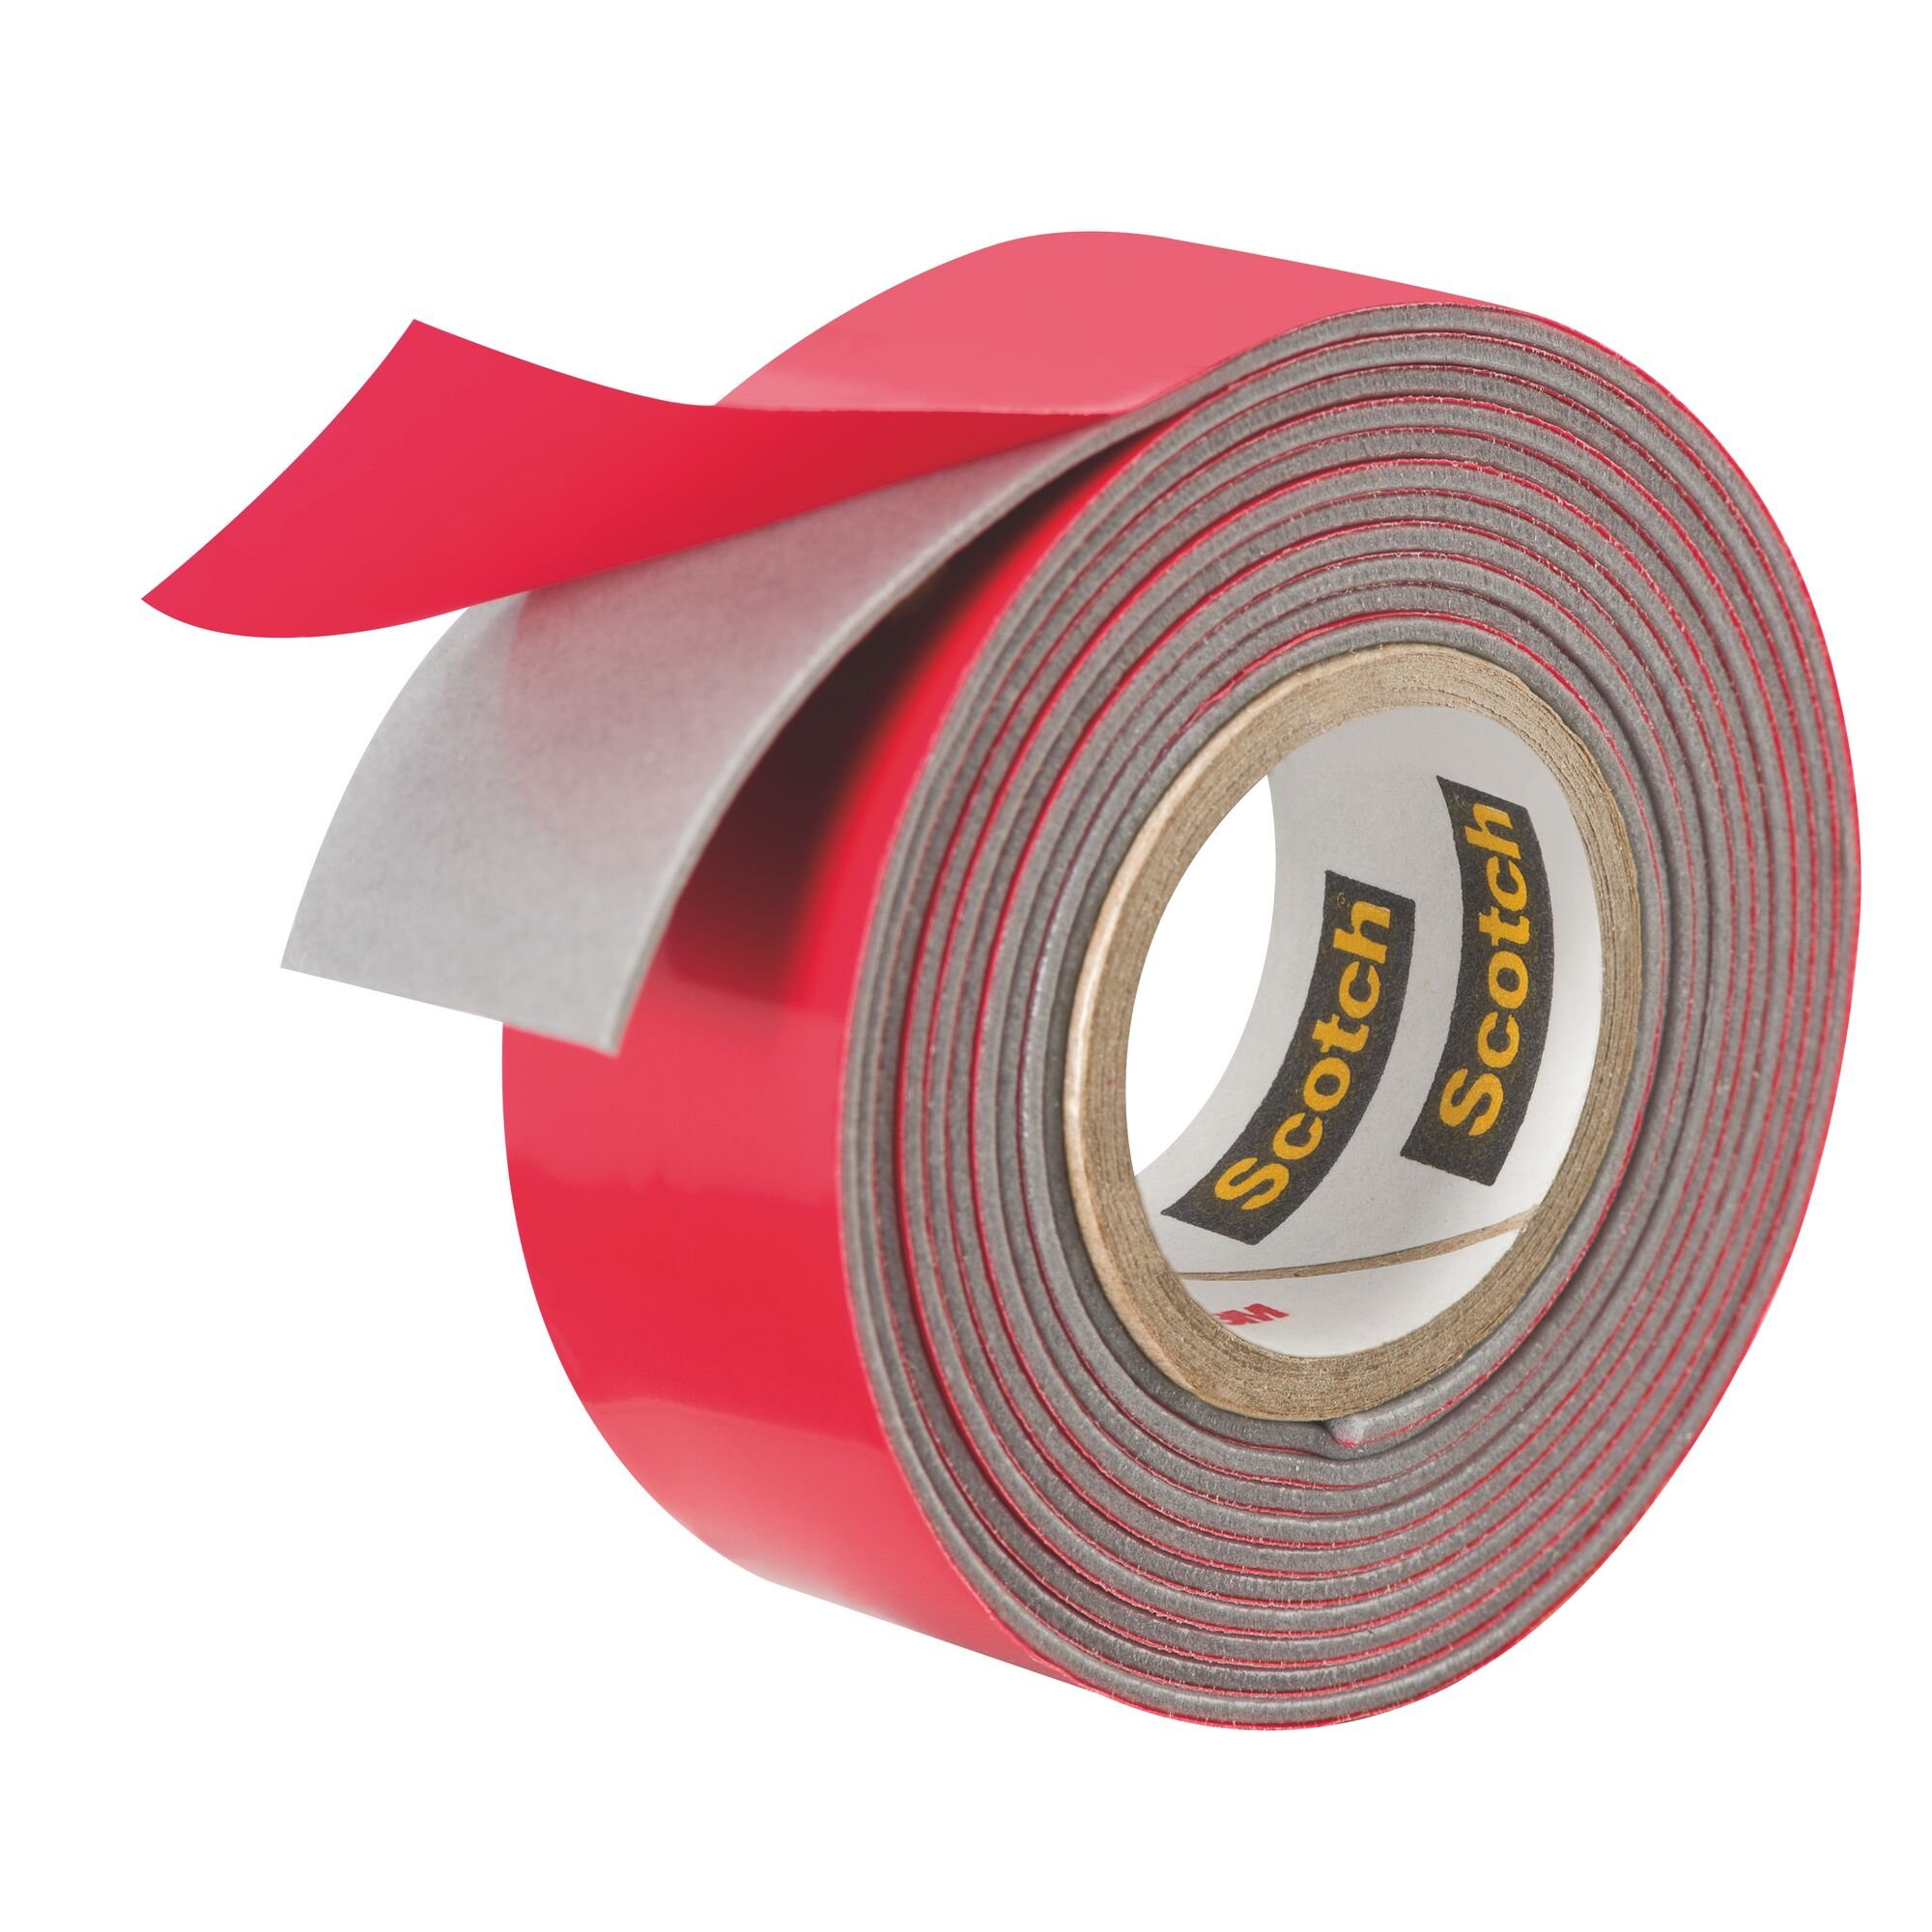 Scotch double-sided adhesive tape extra strong - length 1.5 m